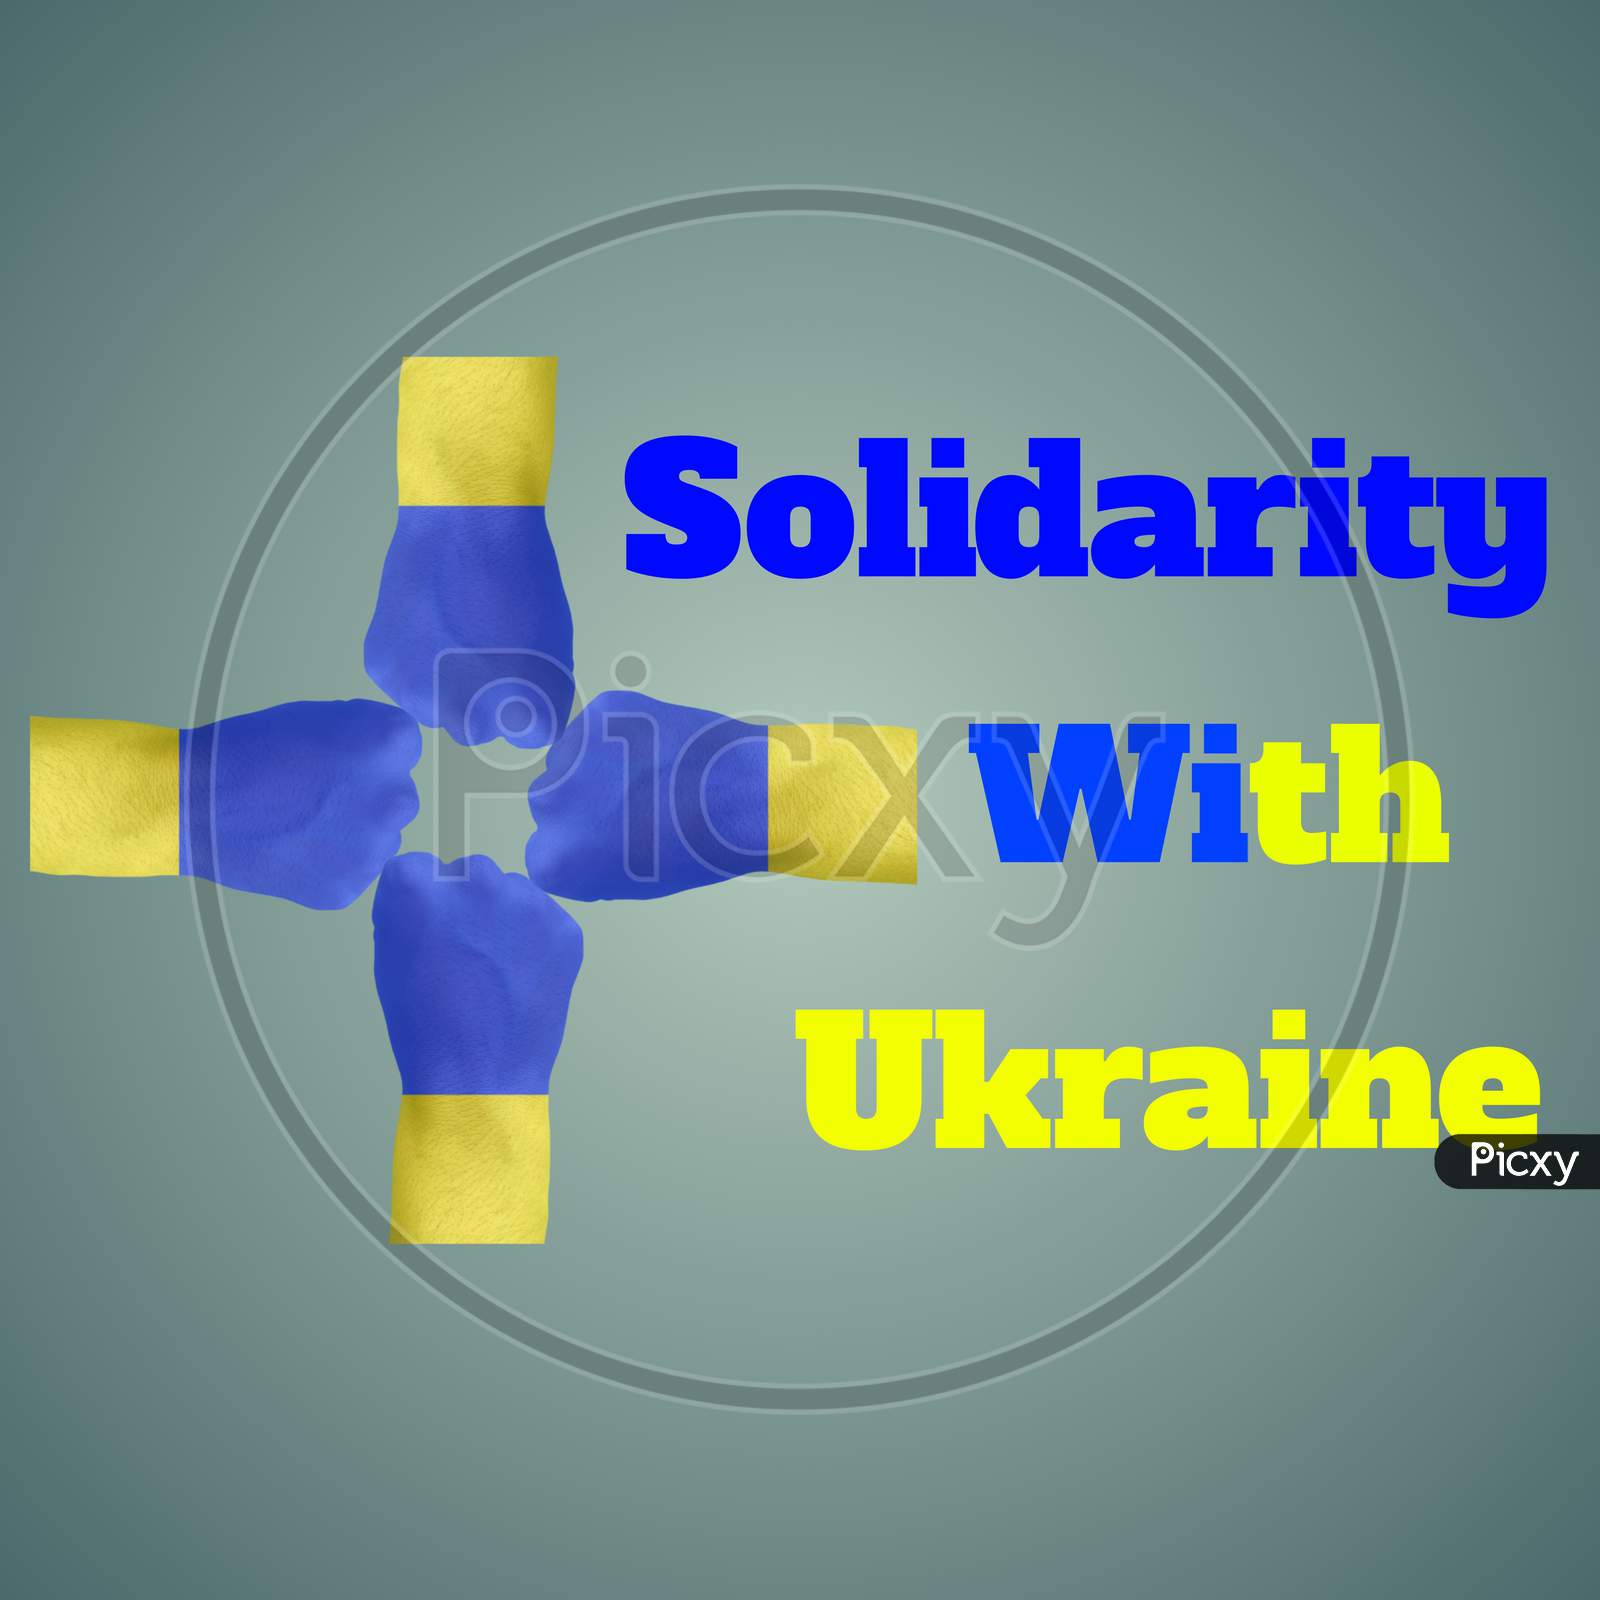 A Solidarity With Ukraine Illustration Photos Background